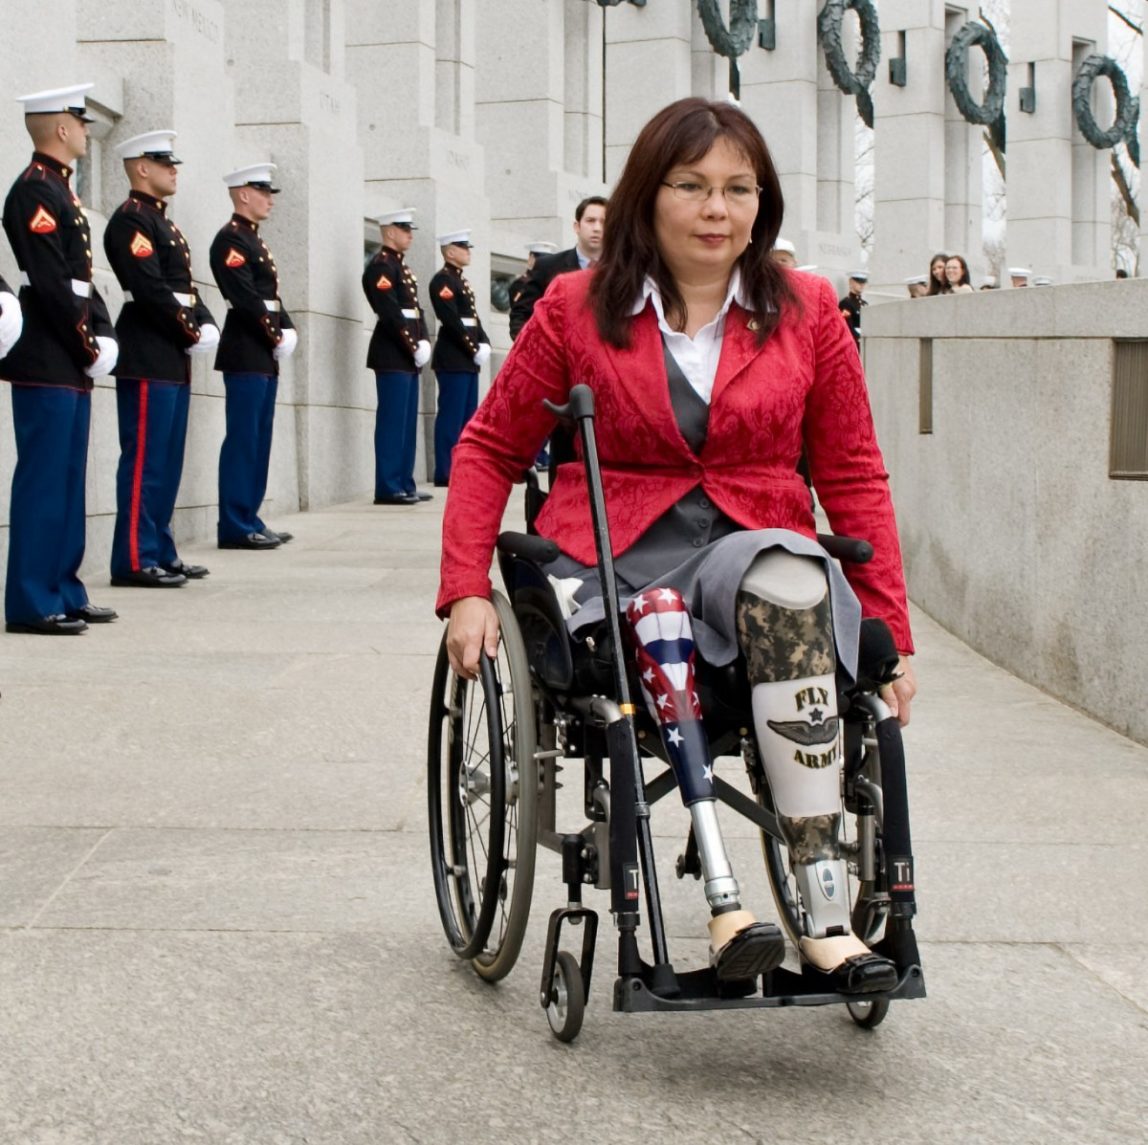 In this Thursday, March 11, 2010 file photo, Tammy Duckworth, assistant secretary for the U.S. Department of Veterans Affairs, arrives at the World War II Memorial in Washington for a ceremony honoring World War II veterans who fought in the Pacific. Duckworth became a double amputee when her National Guard helicopter was shot down in Iraq in 2004. (AP Photo/Cliff Owen)